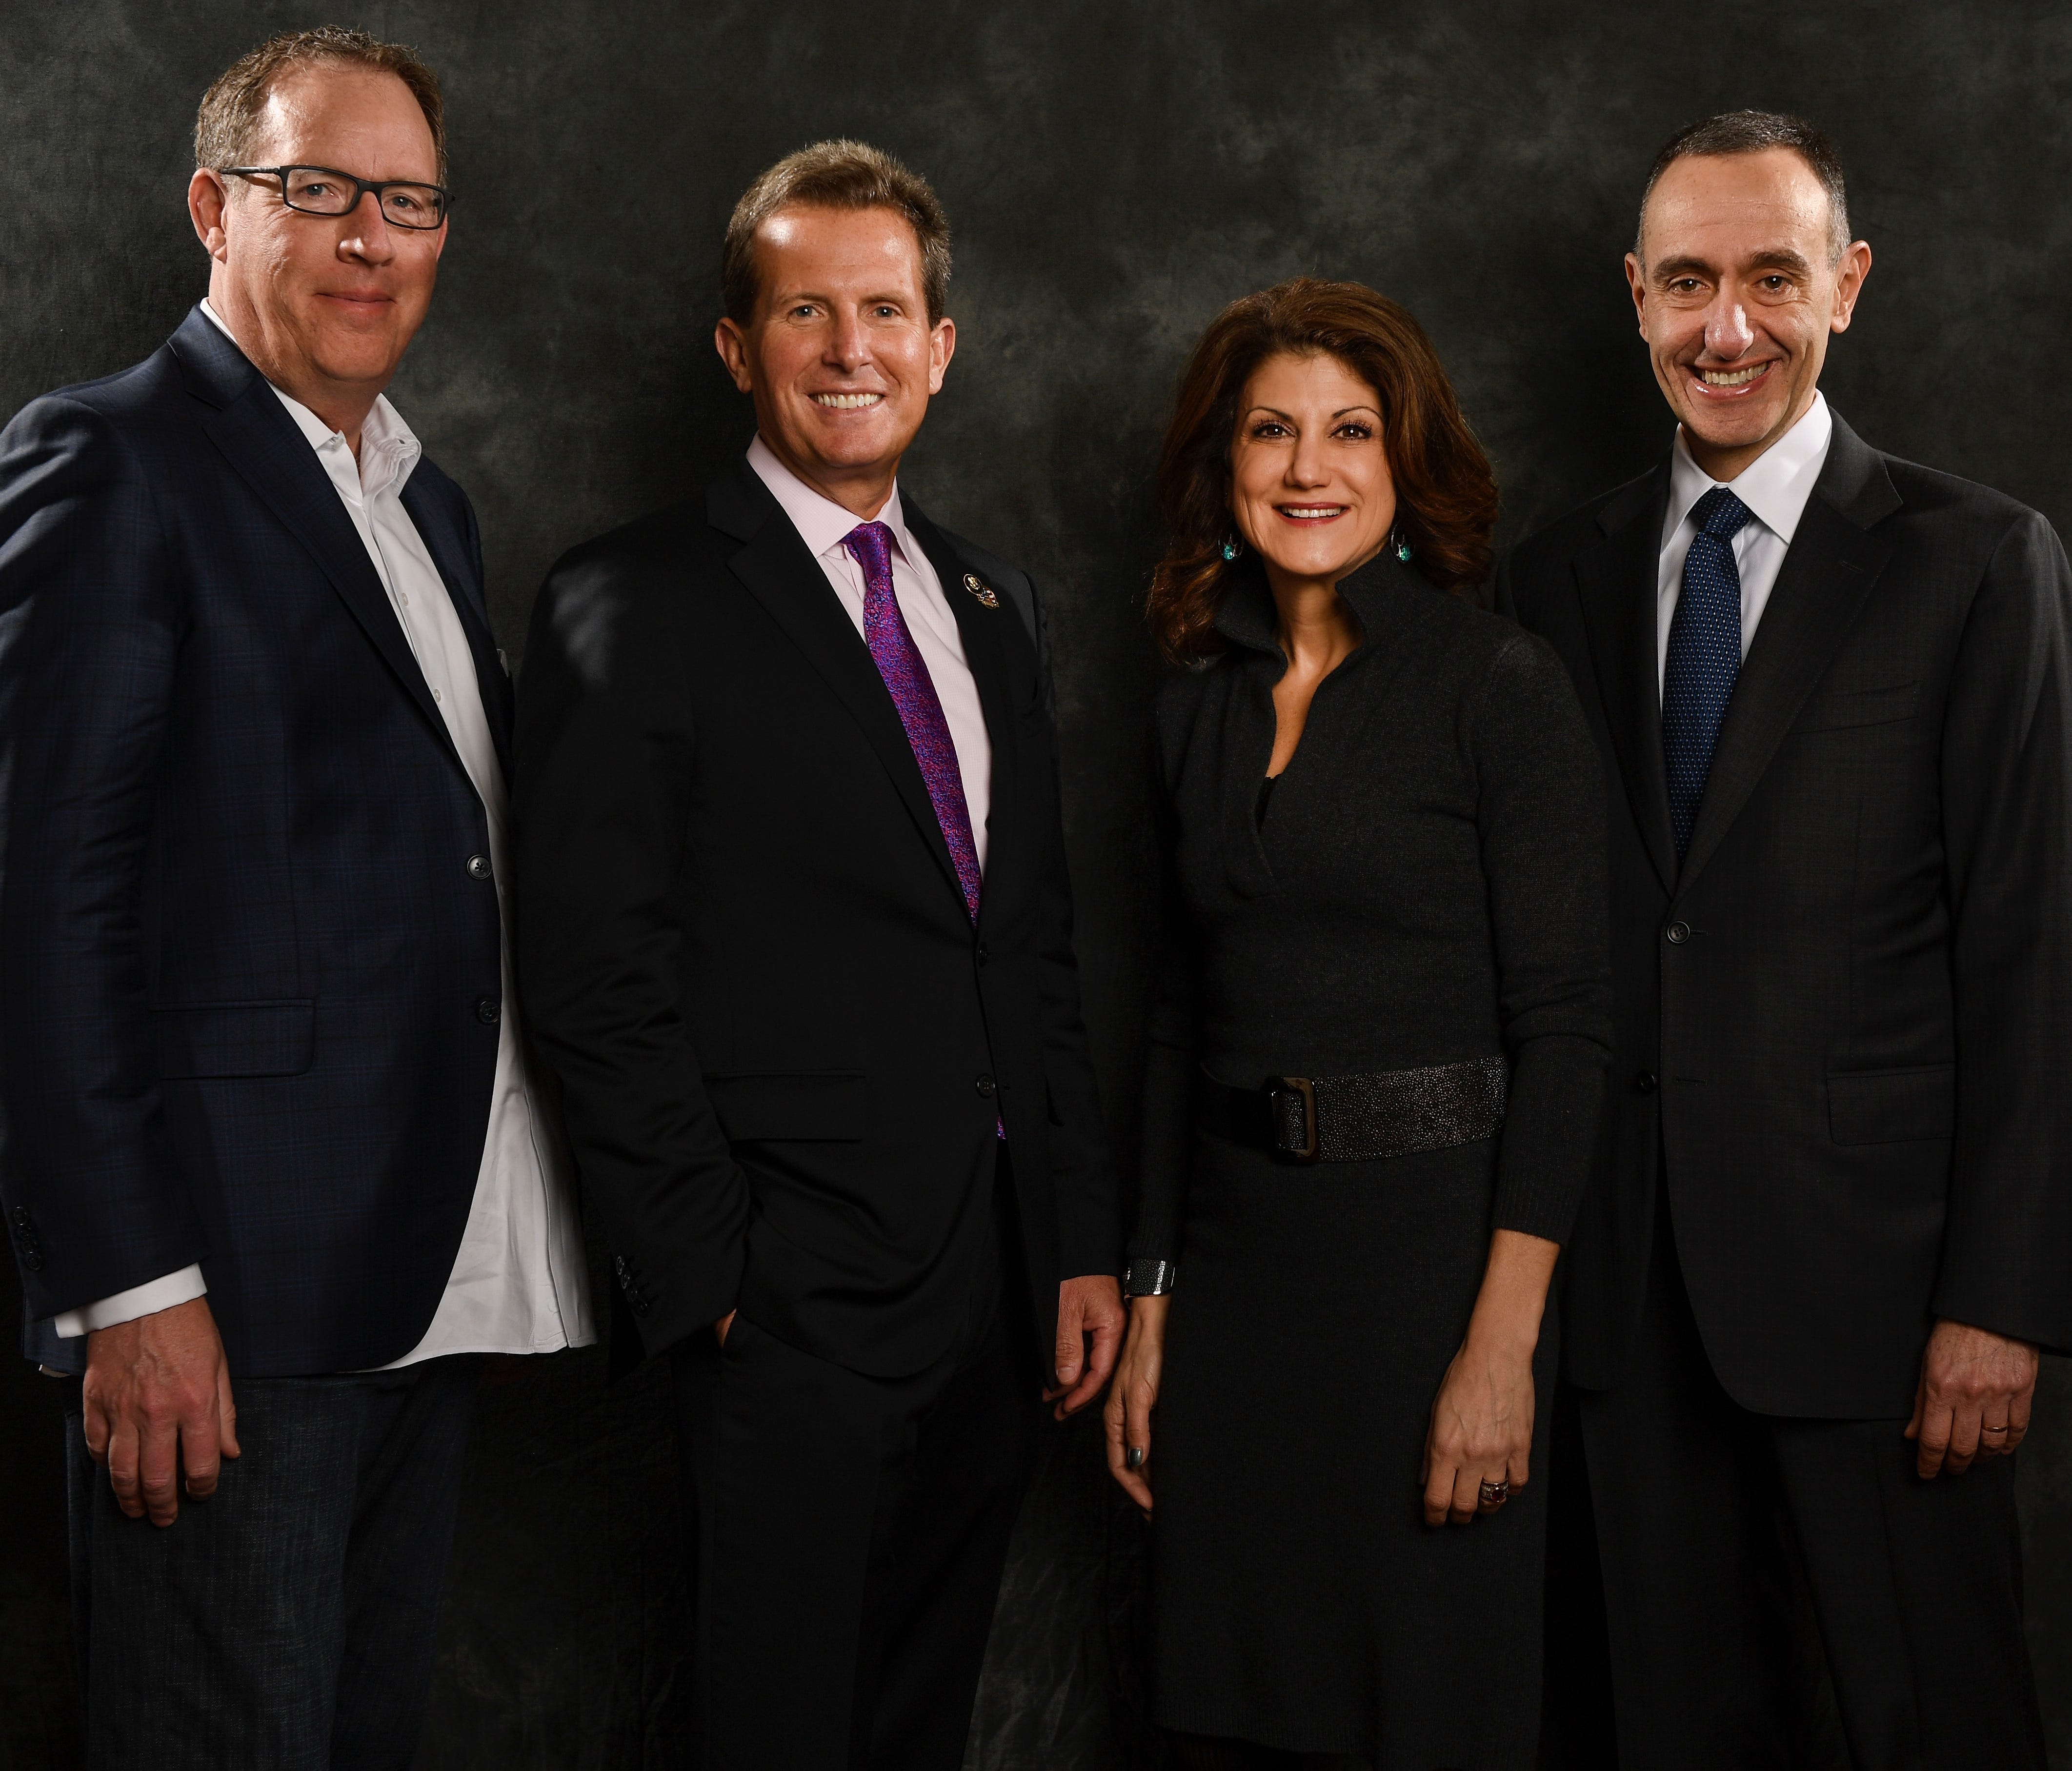 USA TODAY's annual hotel CEO roundtable featured, from left, Greg Mount of Red Lion Hotels,  Geoff Ballotti of Wyndham Hotel Group, Niki Leondakis at Two Roads Hospitality and Elie Maalouf at InterContinental Hotels Group.